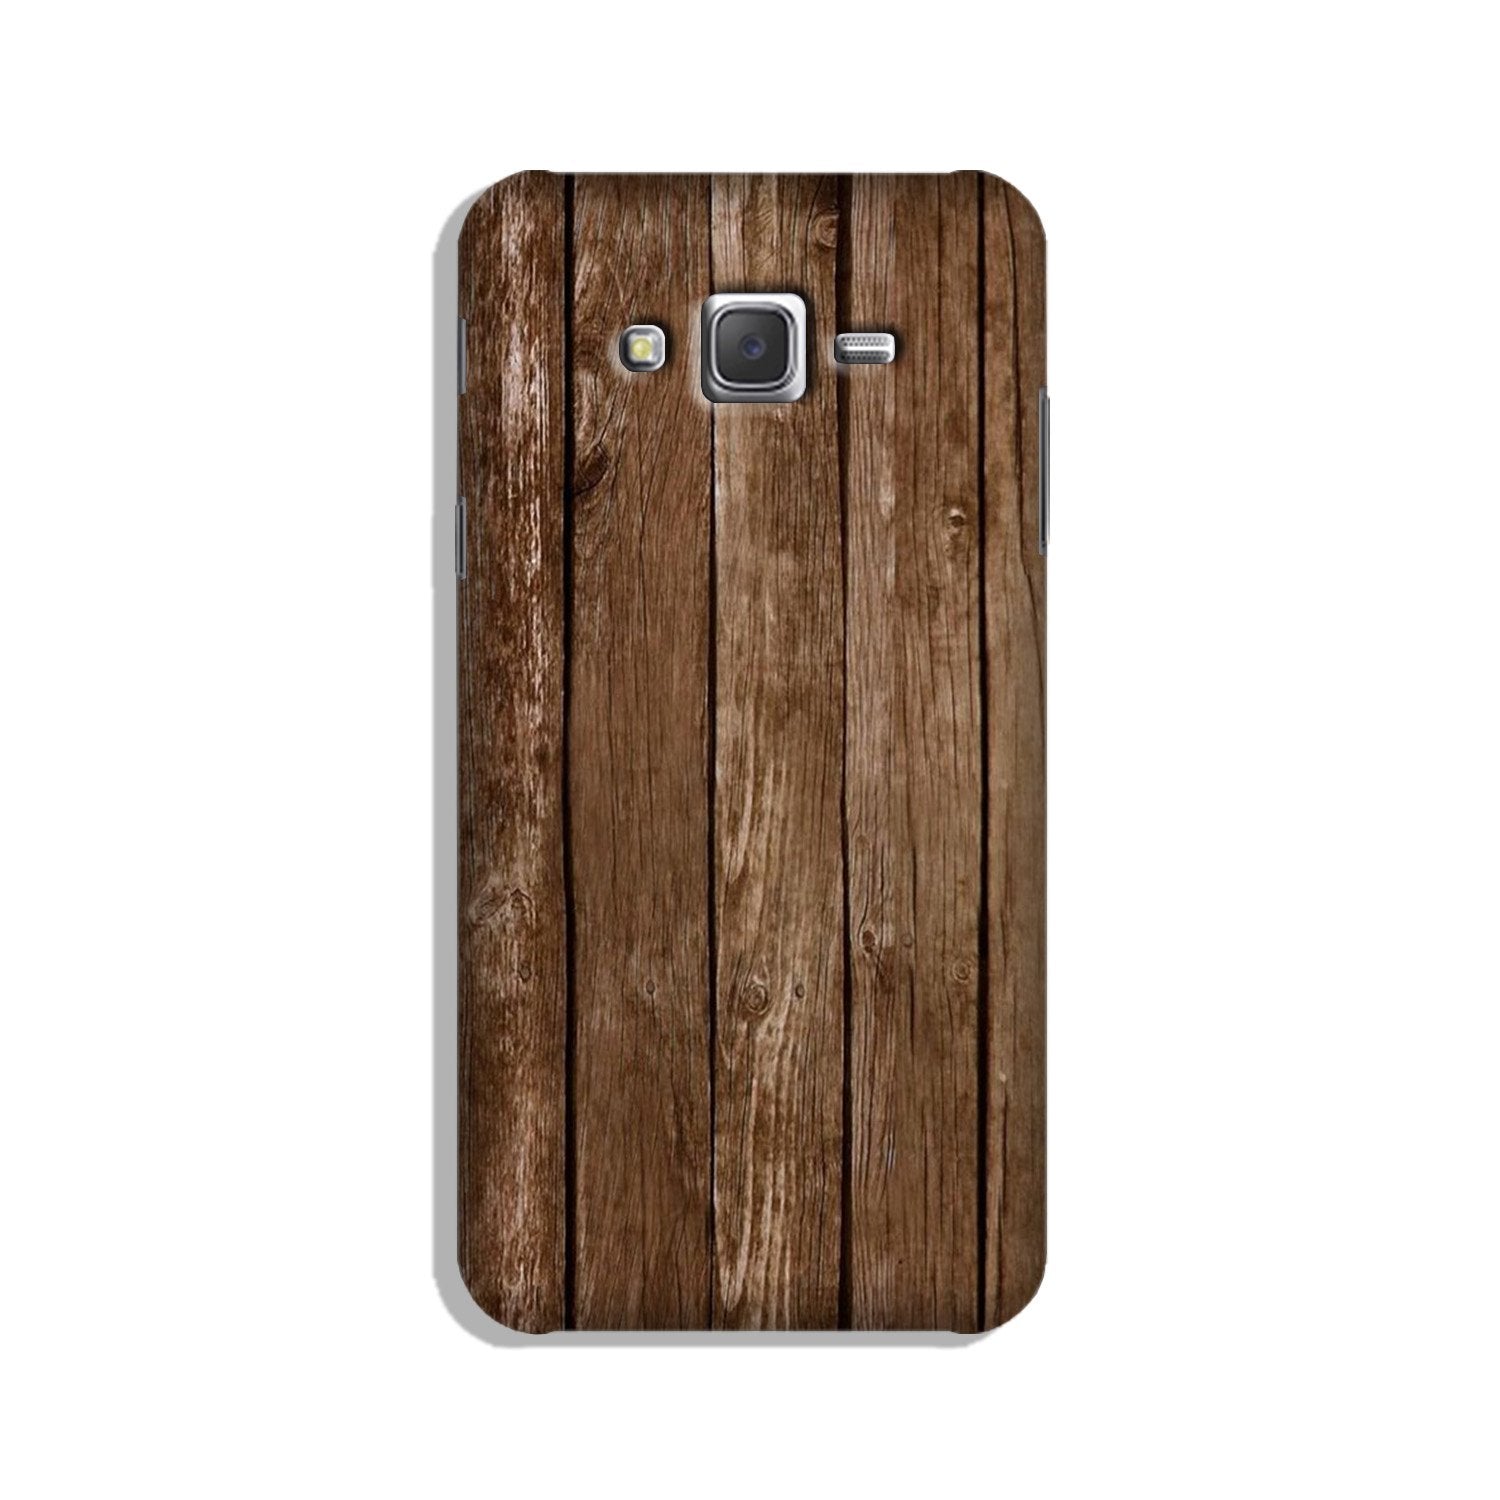 Wooden Look Case for Galaxy J7 Nxt  (Design - 112)